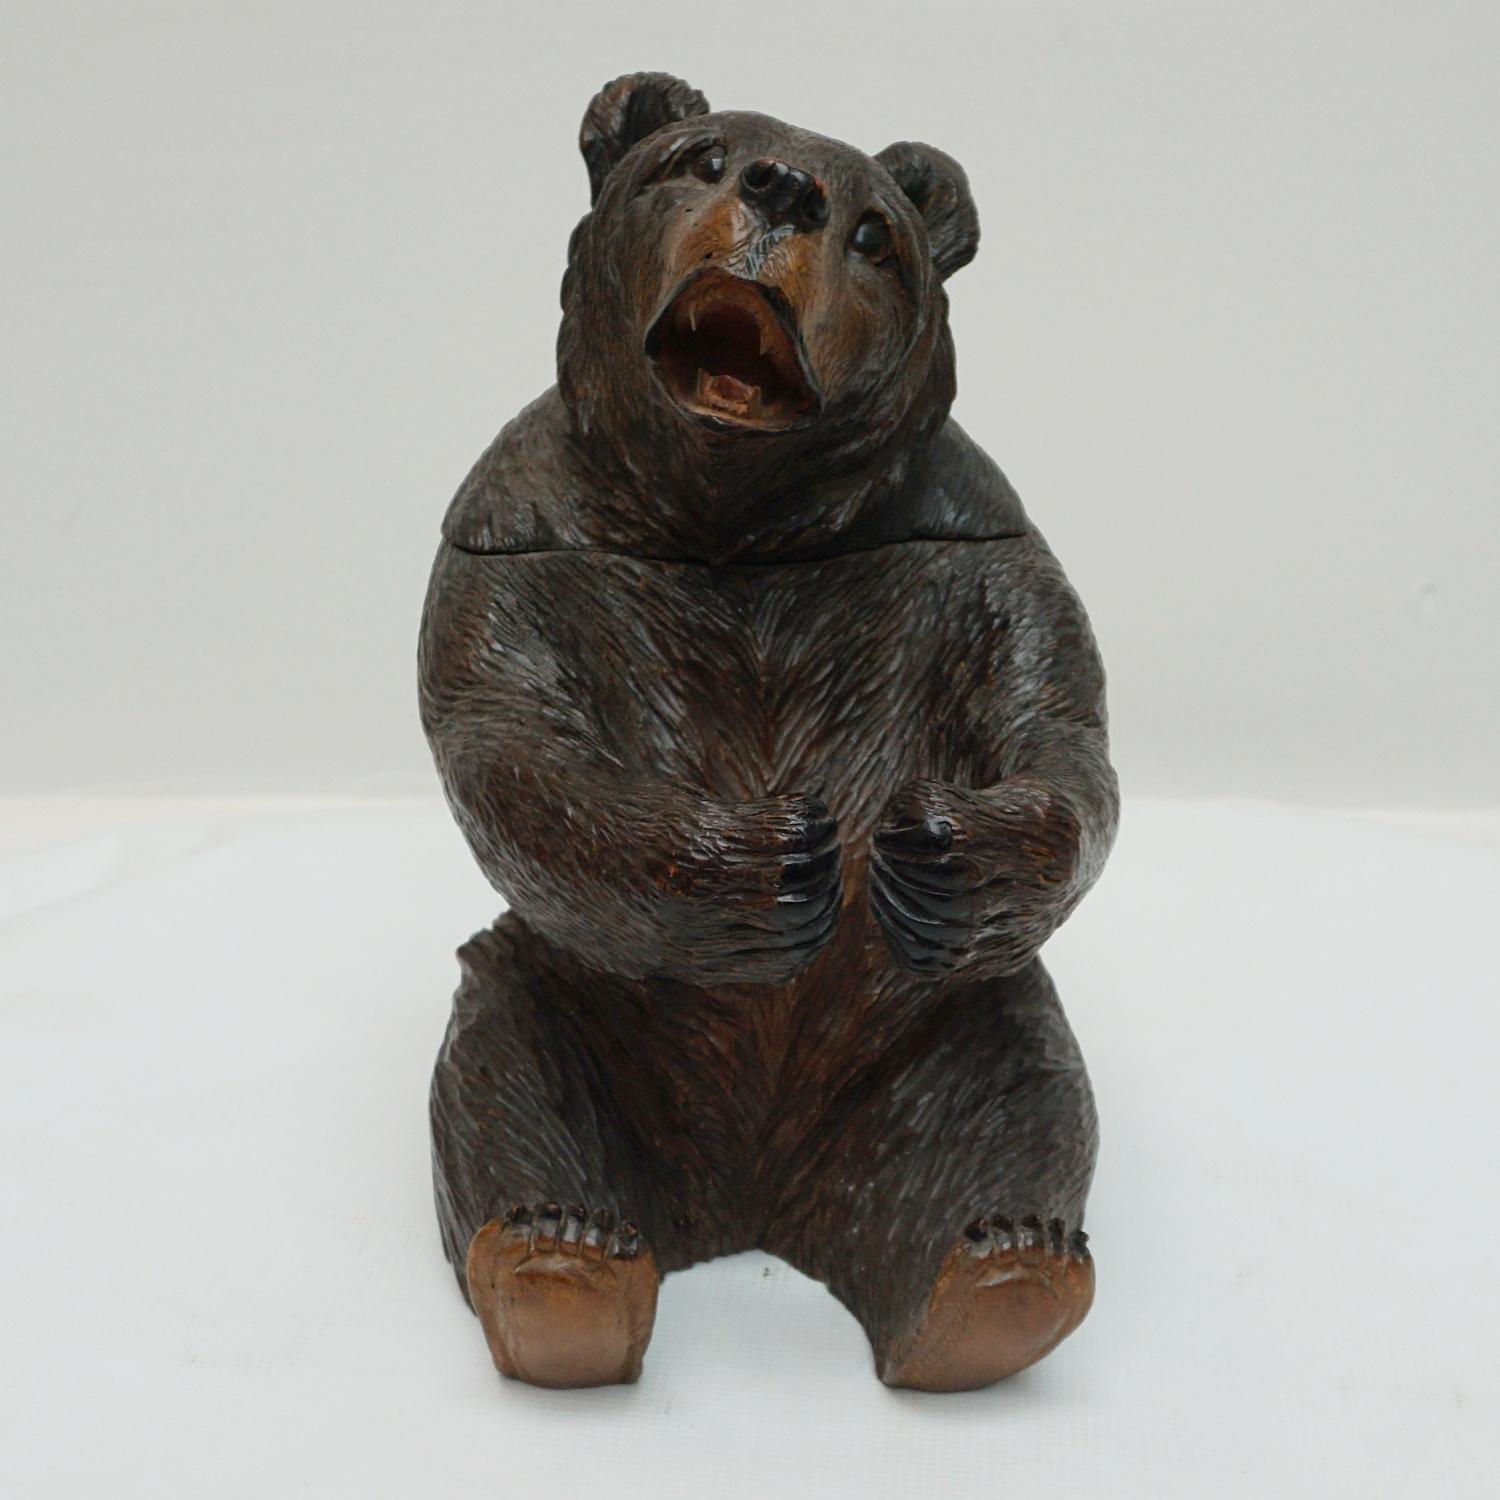 A Black Forest seated carved bear as a tobacco jar. Finely carved detail. Original glass eyes. Linden Wood.

Dimensions: H 25cm W 15cm D 20cm

Origin: Swiss

Date: circa 1900

Item Number: 1605232.